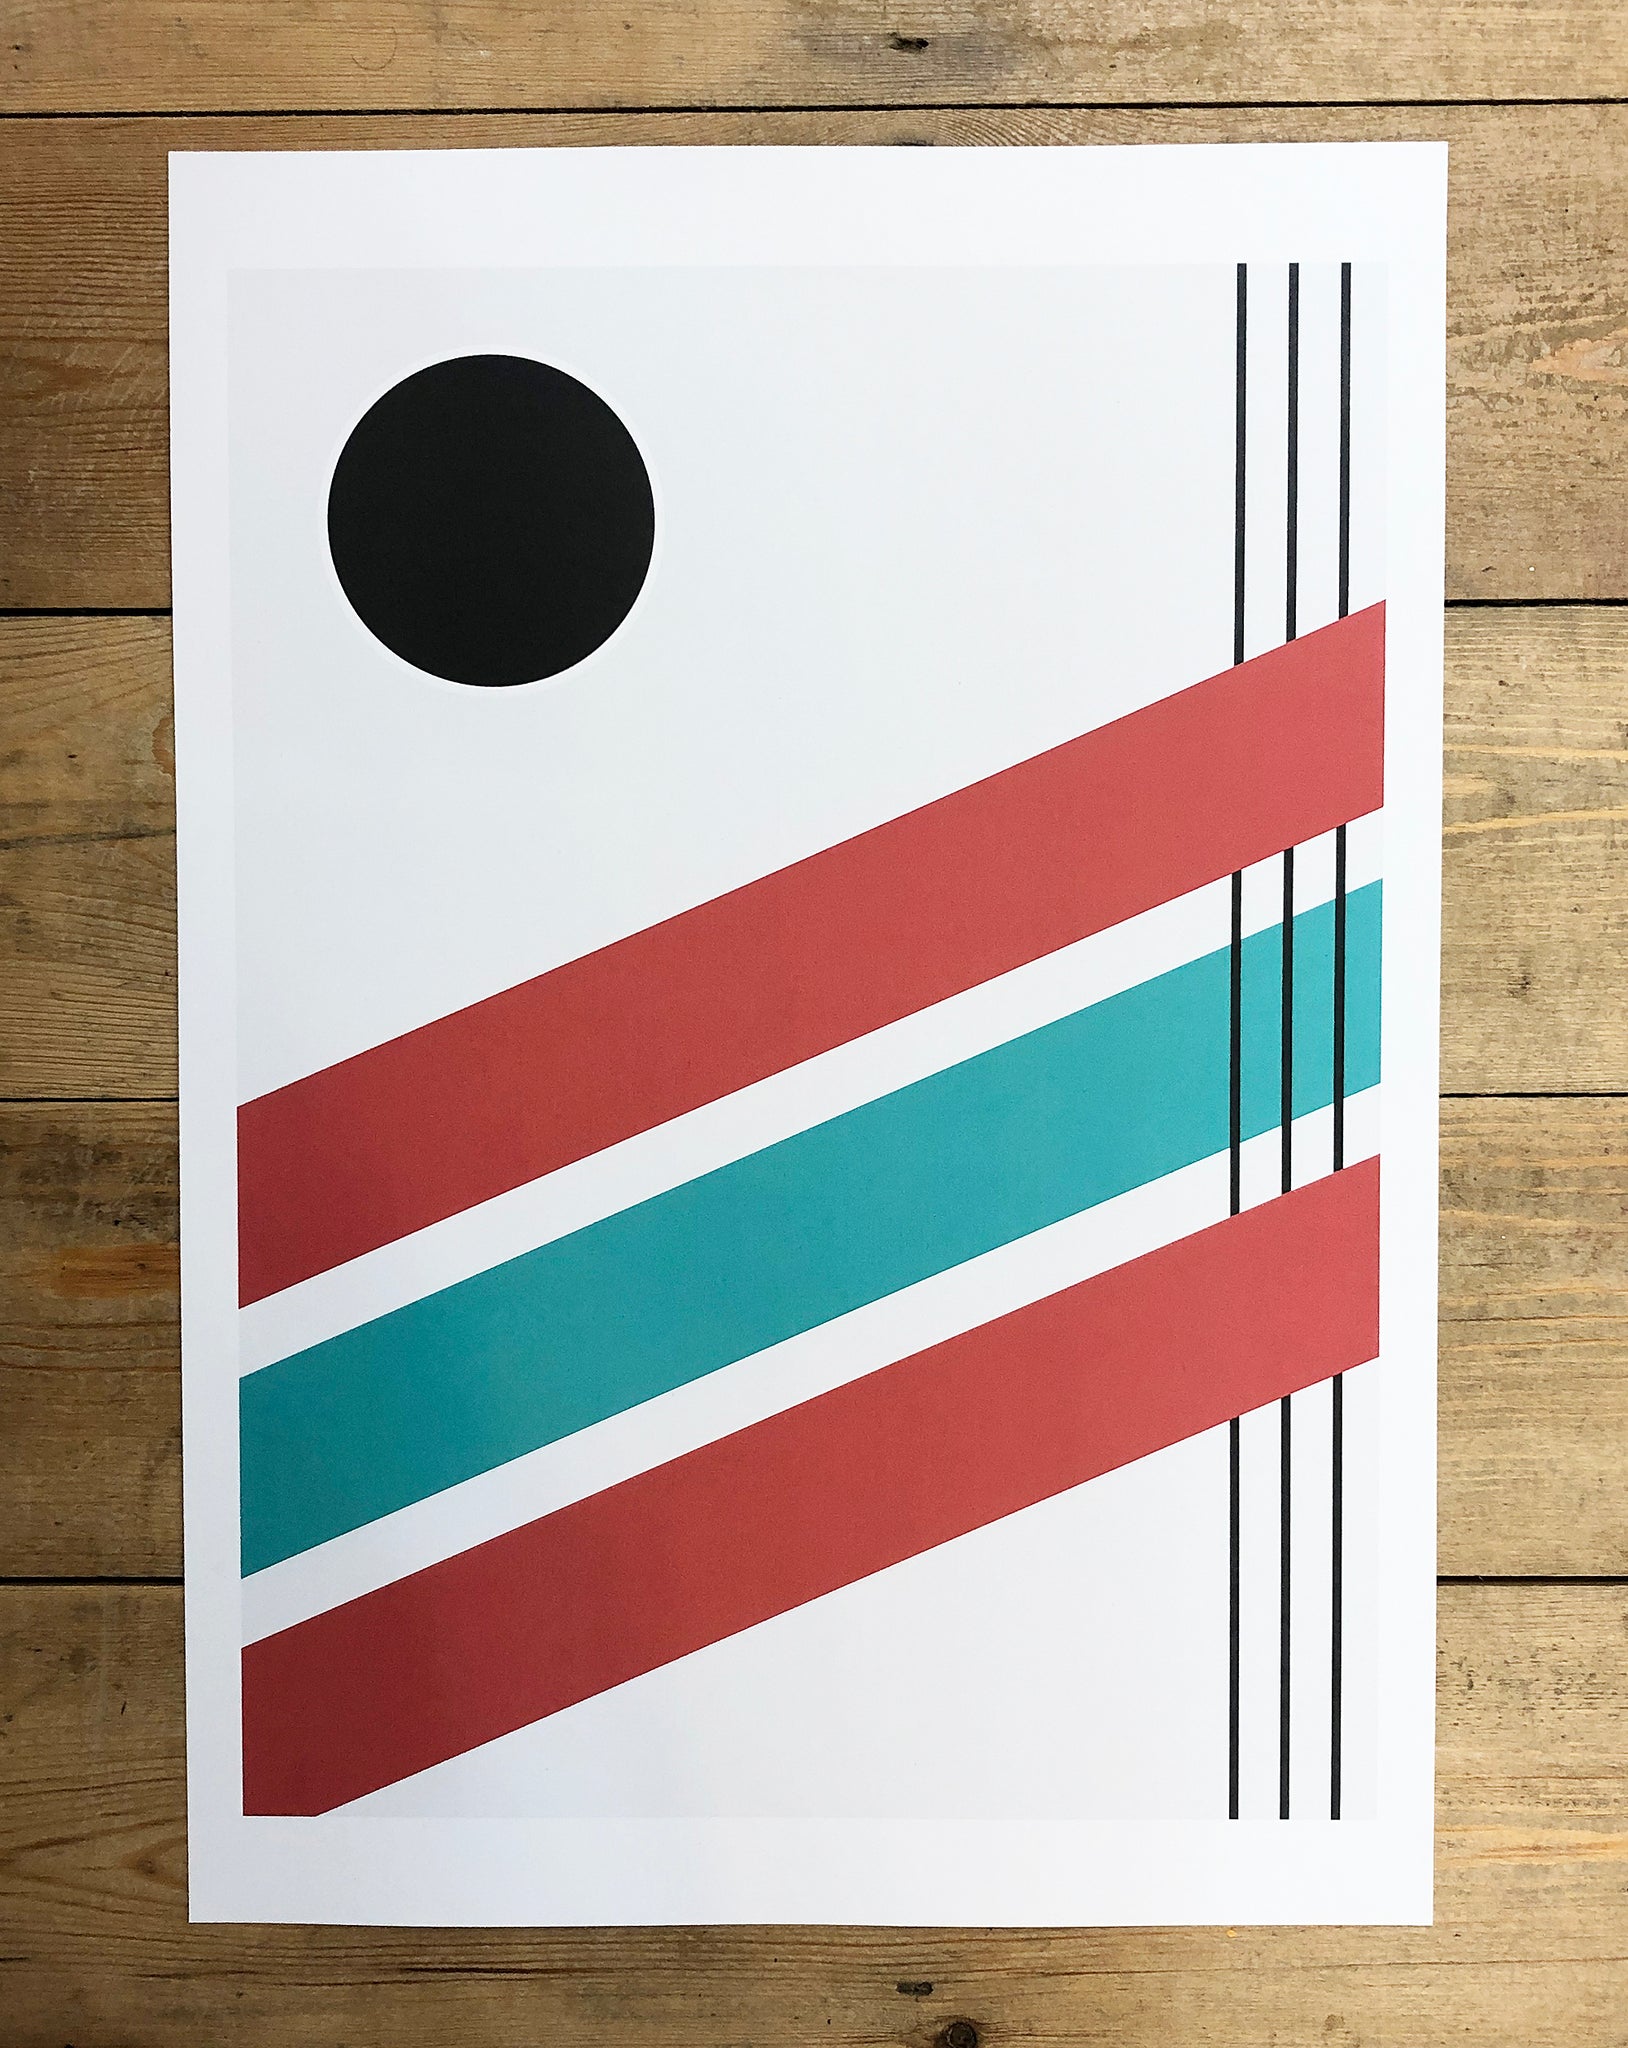 Black, red and green geometric shapes A3 poster print